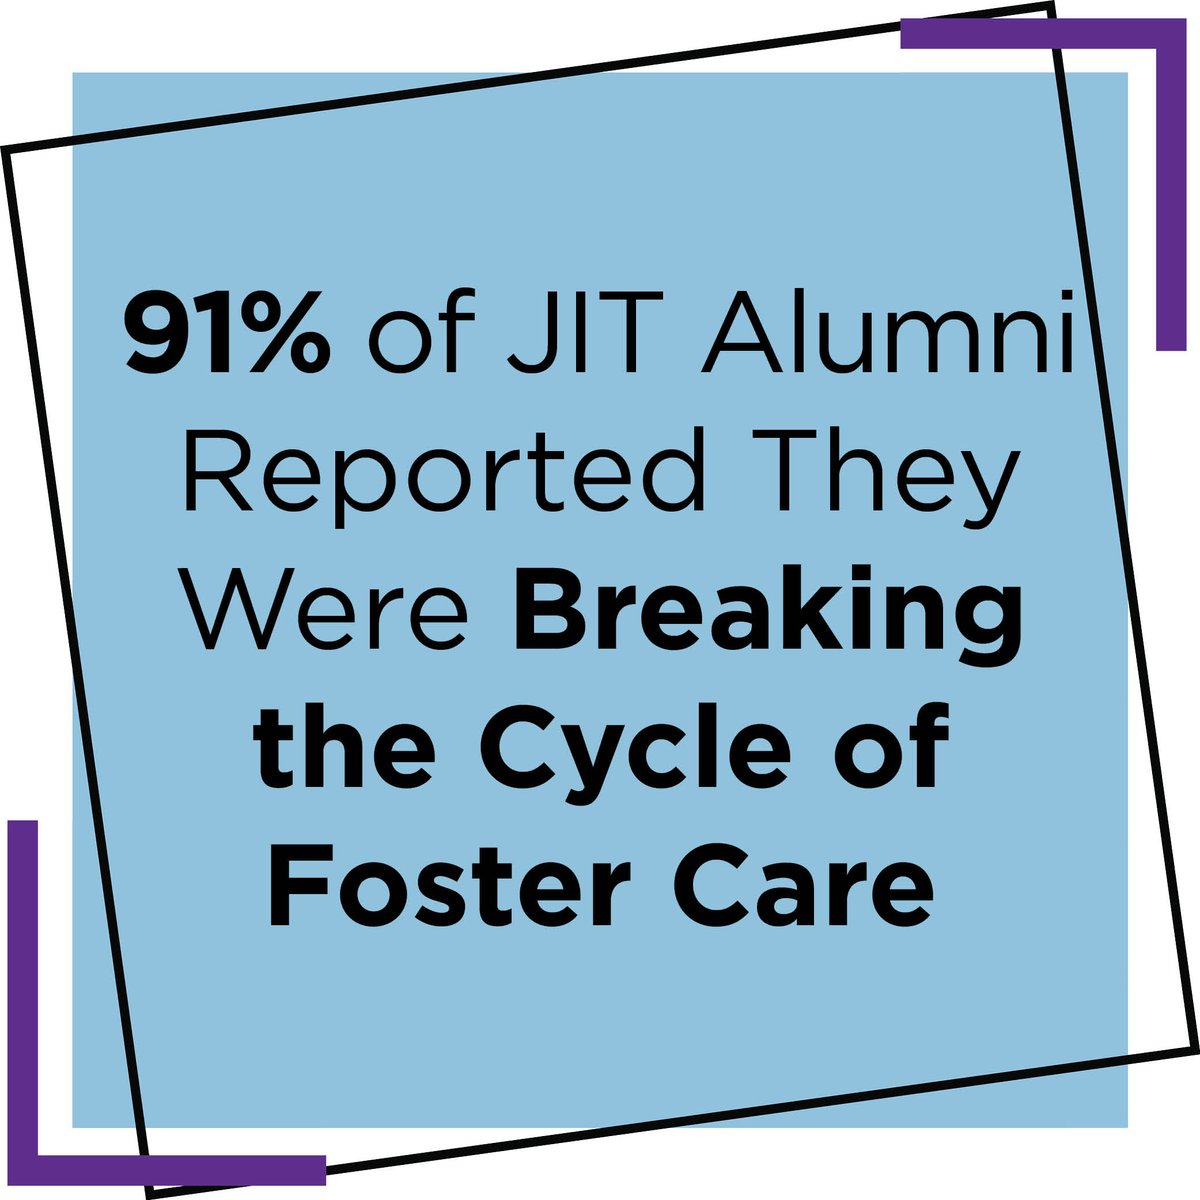 JIT’s Lasting Impact Fulfillment Tracking (LIFT) project connects and surveys past participants, ages of 27-35, using an assessment tool to measure self-sufficiency, stability, well-being, satisfaction, and resilience for the long term. Check out this stat from the LIFT results!